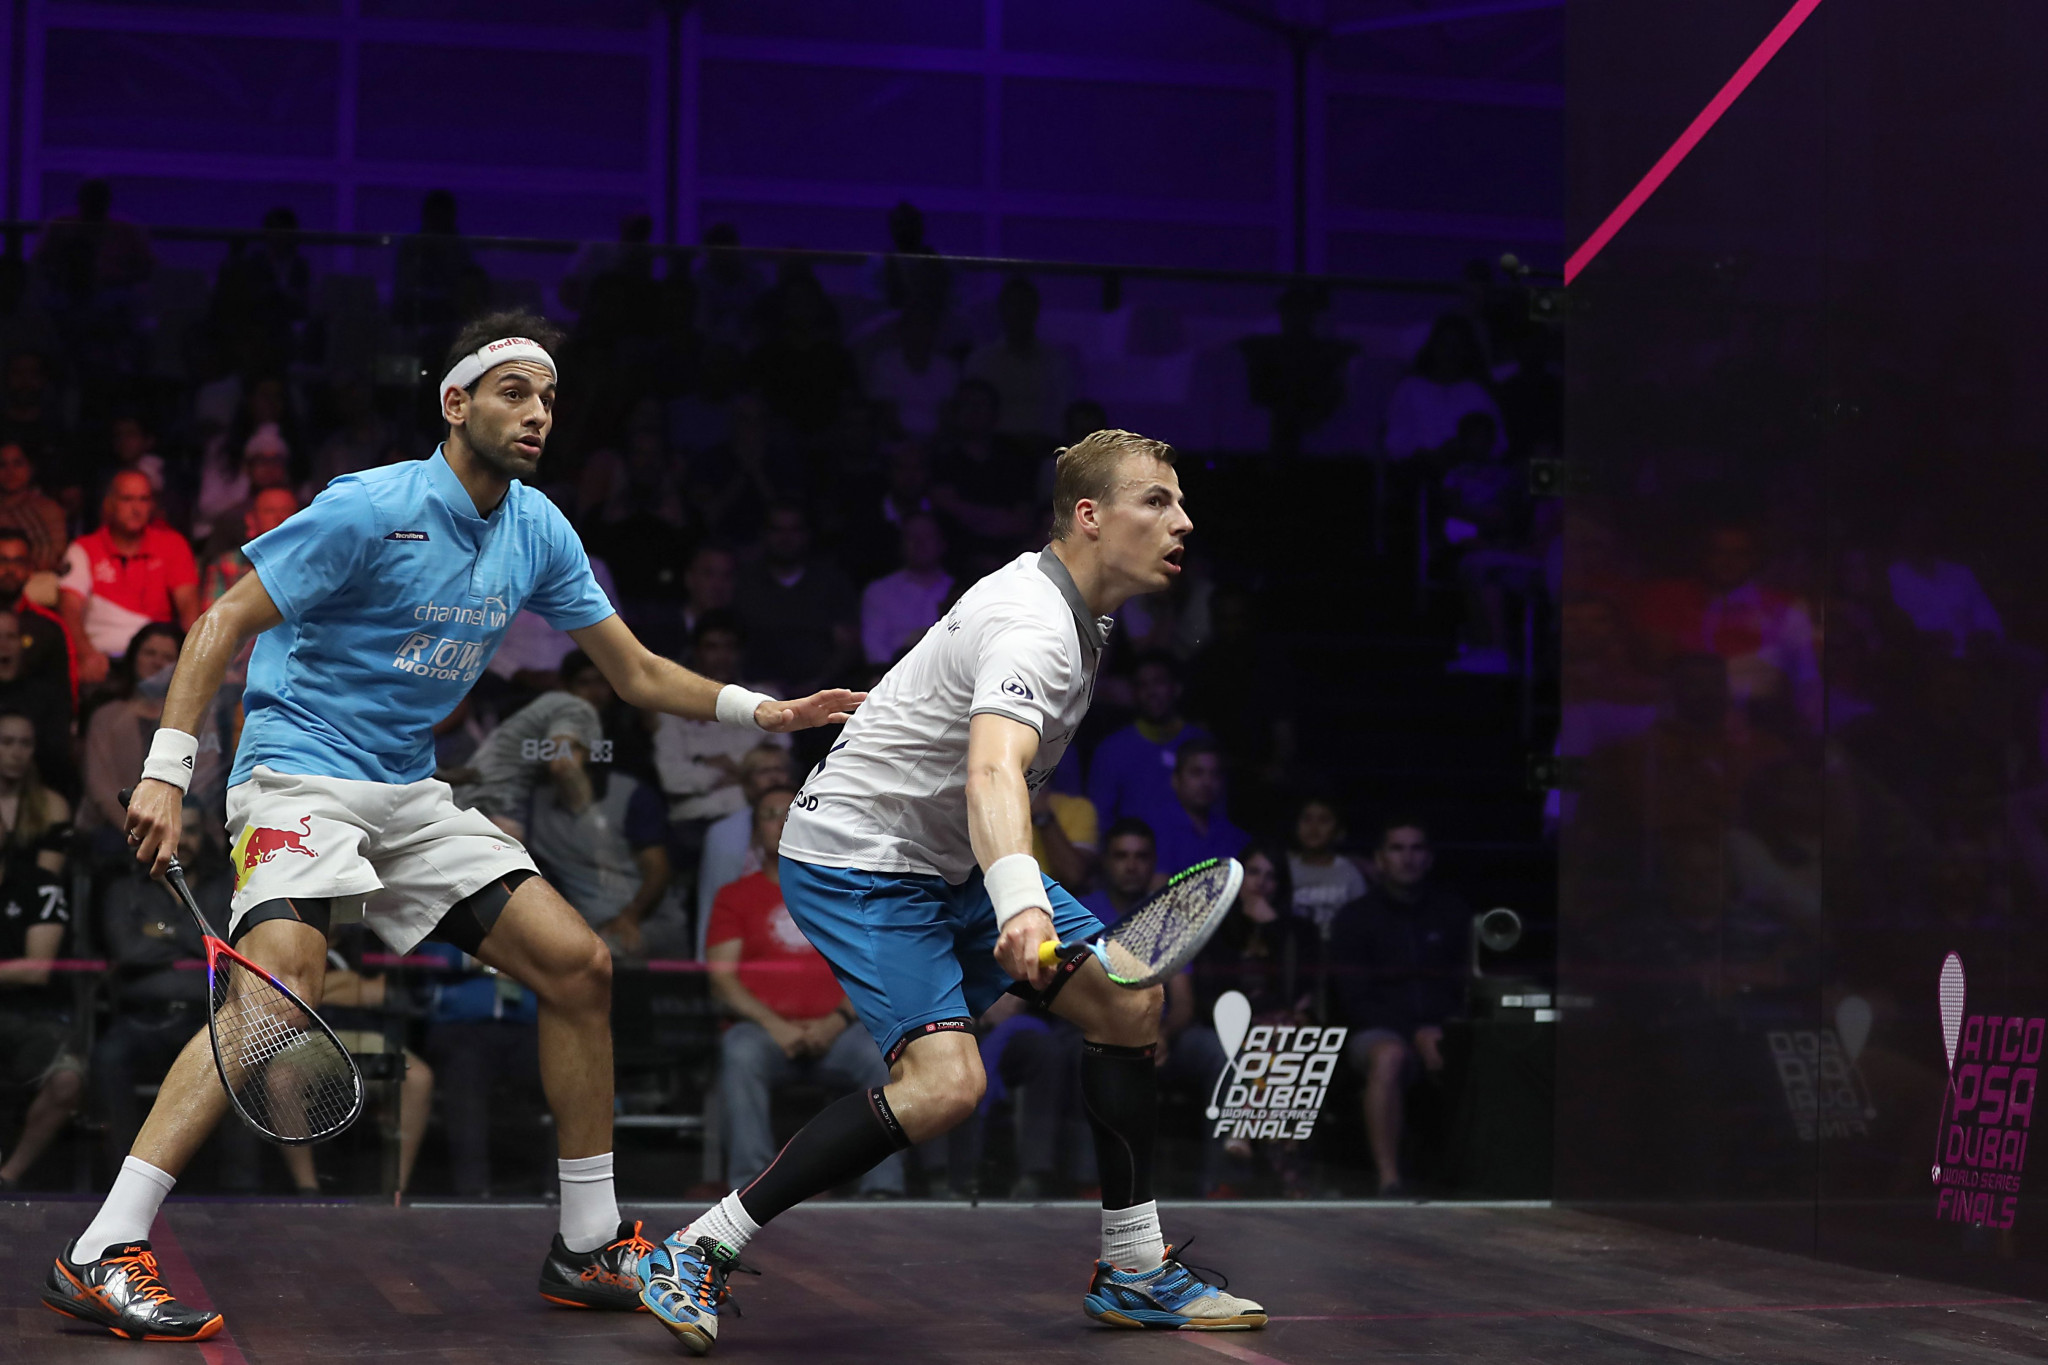 Squash community reacts with anger at Paris 2024 snub as players